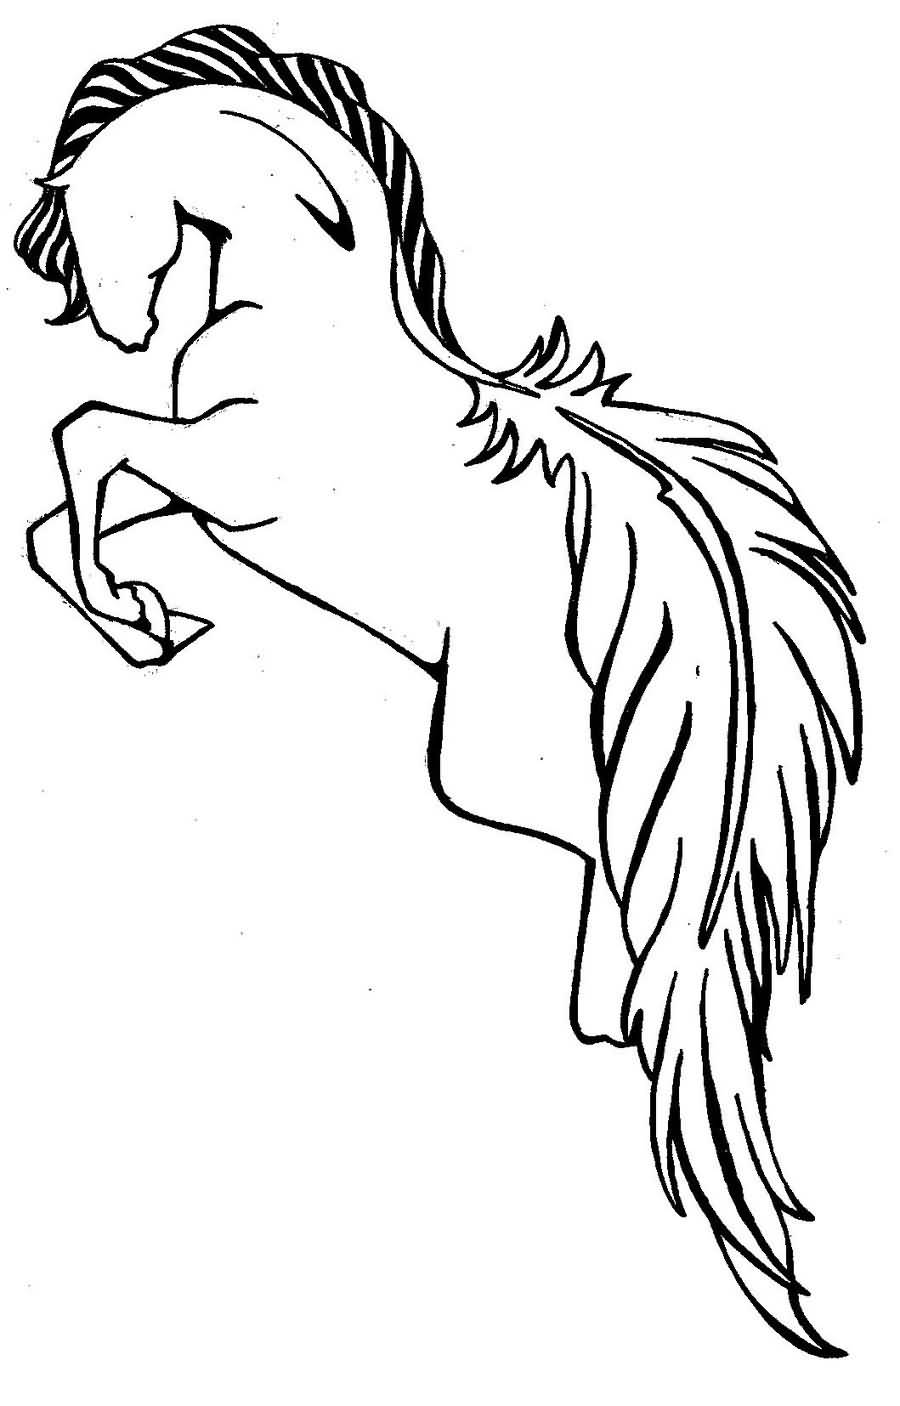 Black Outline Horse Feather Tail Tattoo Stencil